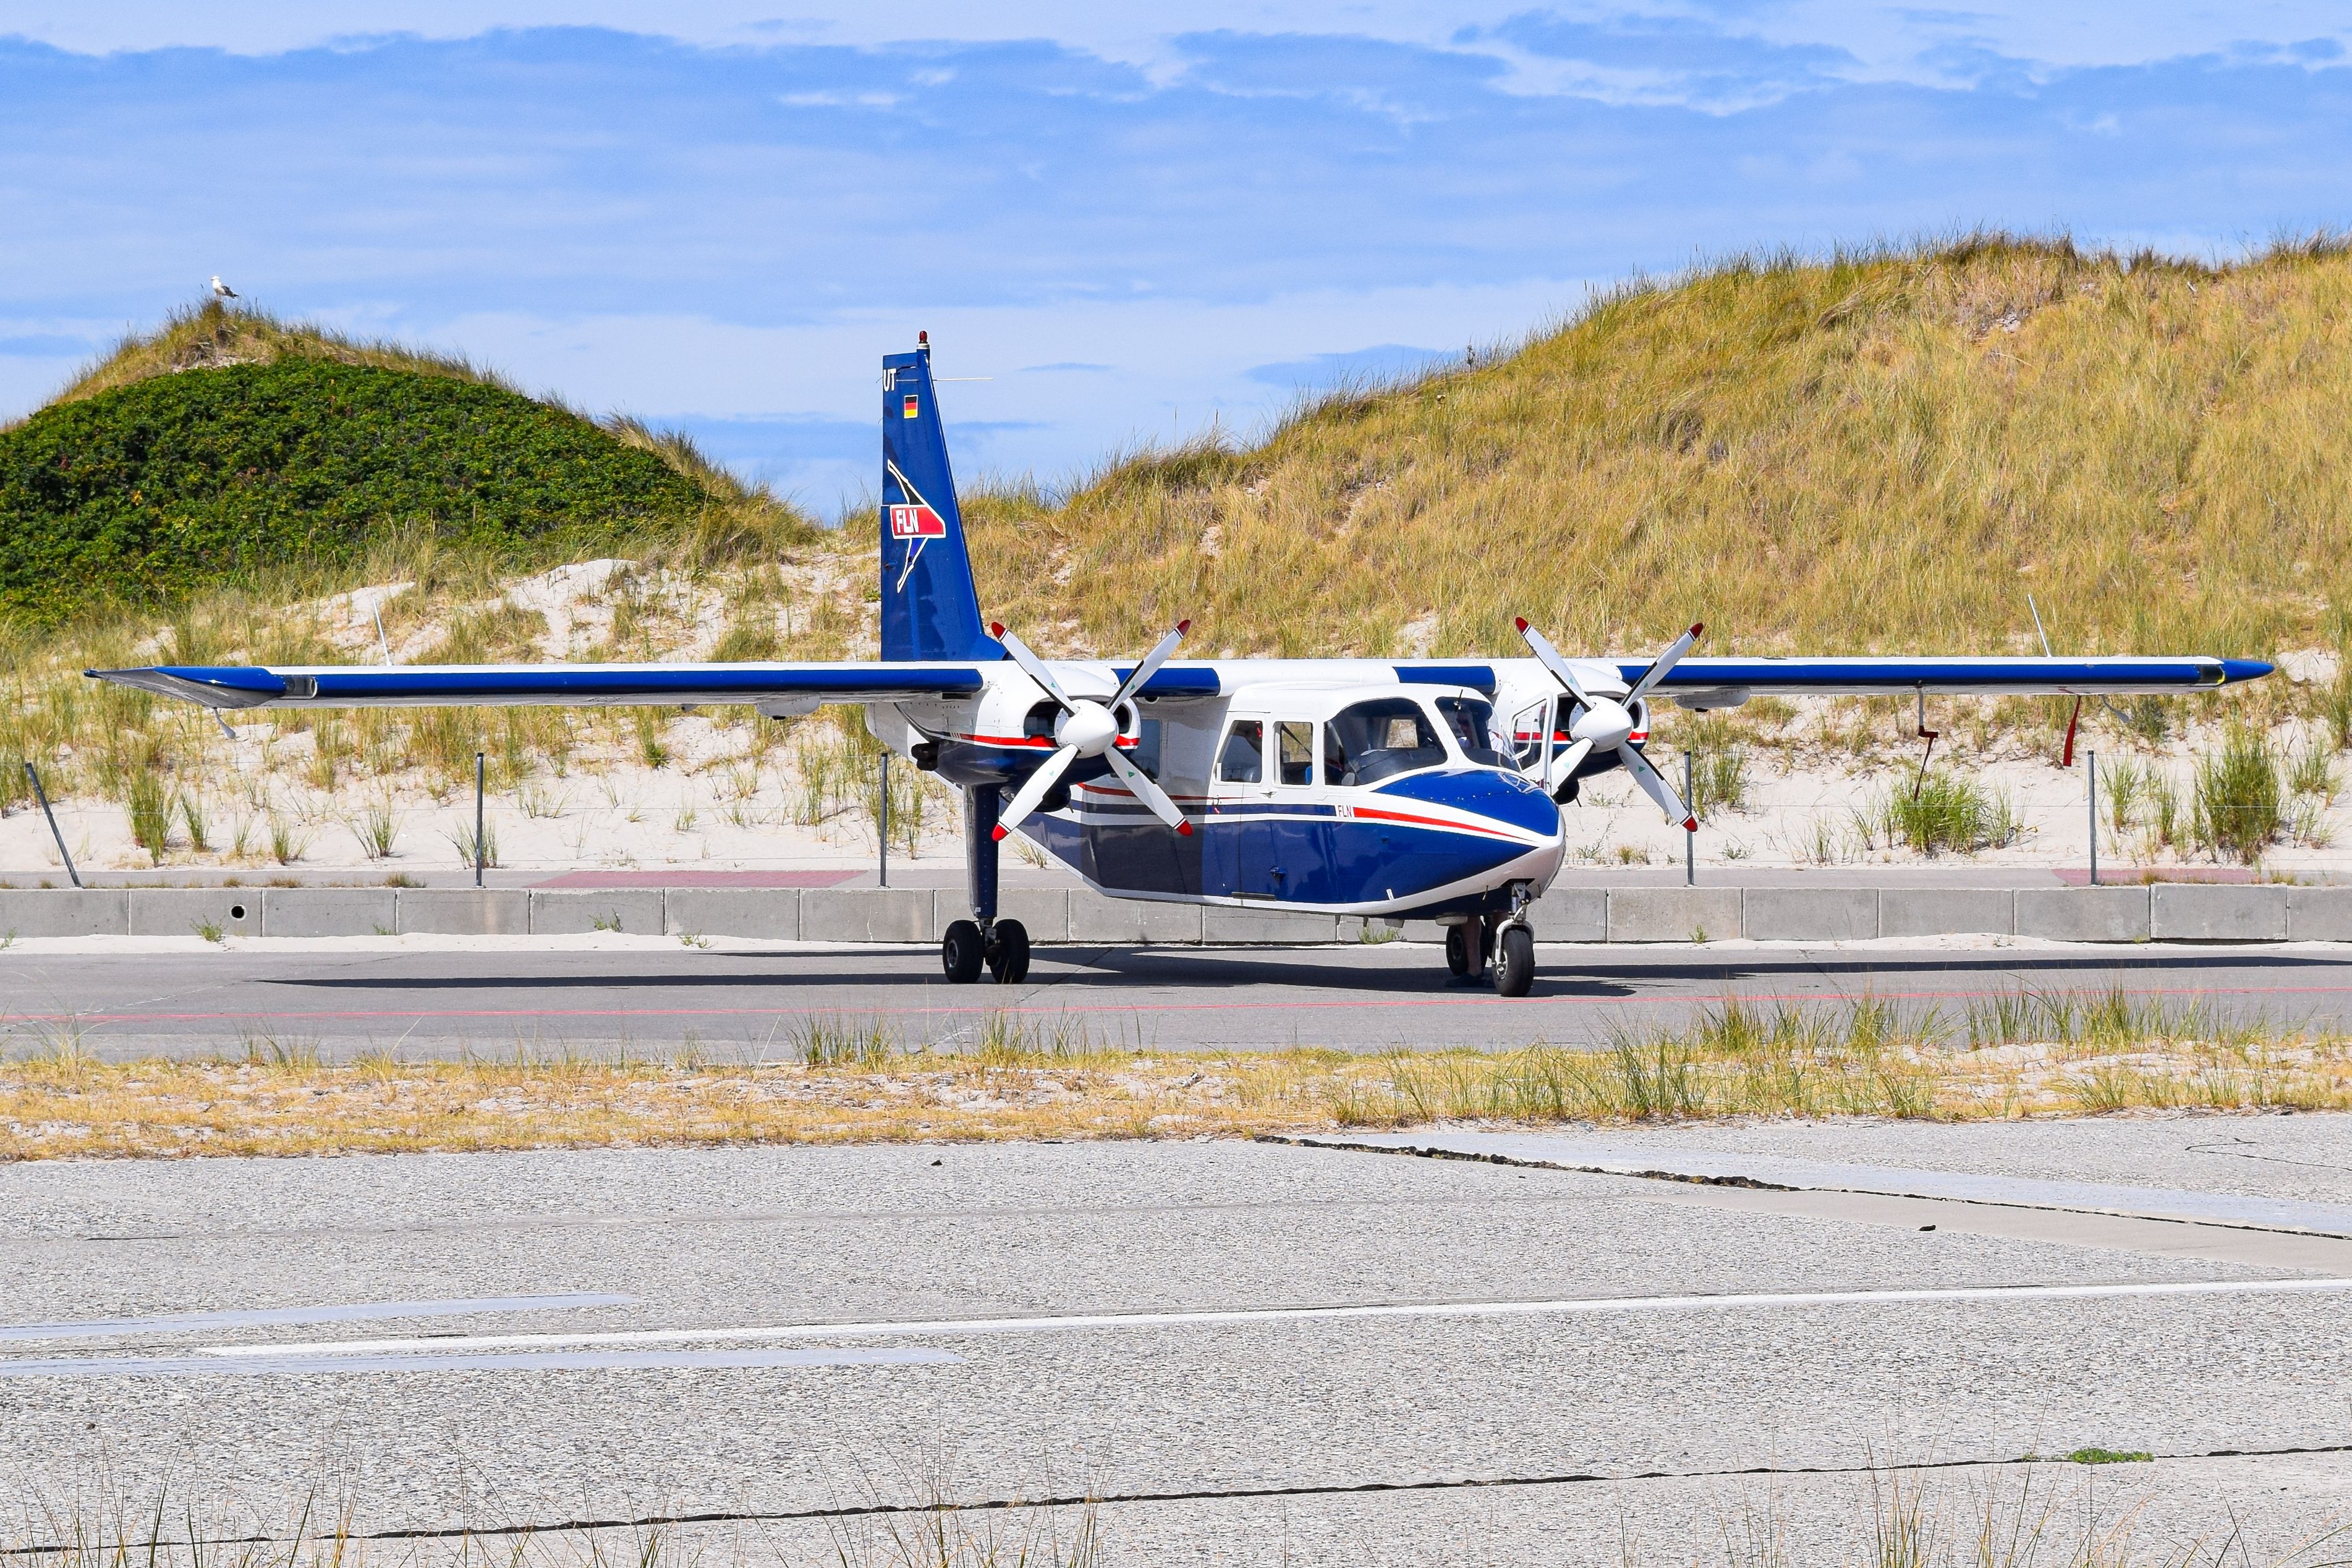 Britten Norman Islander Parked Among The Dunes In Heligoland, Germany